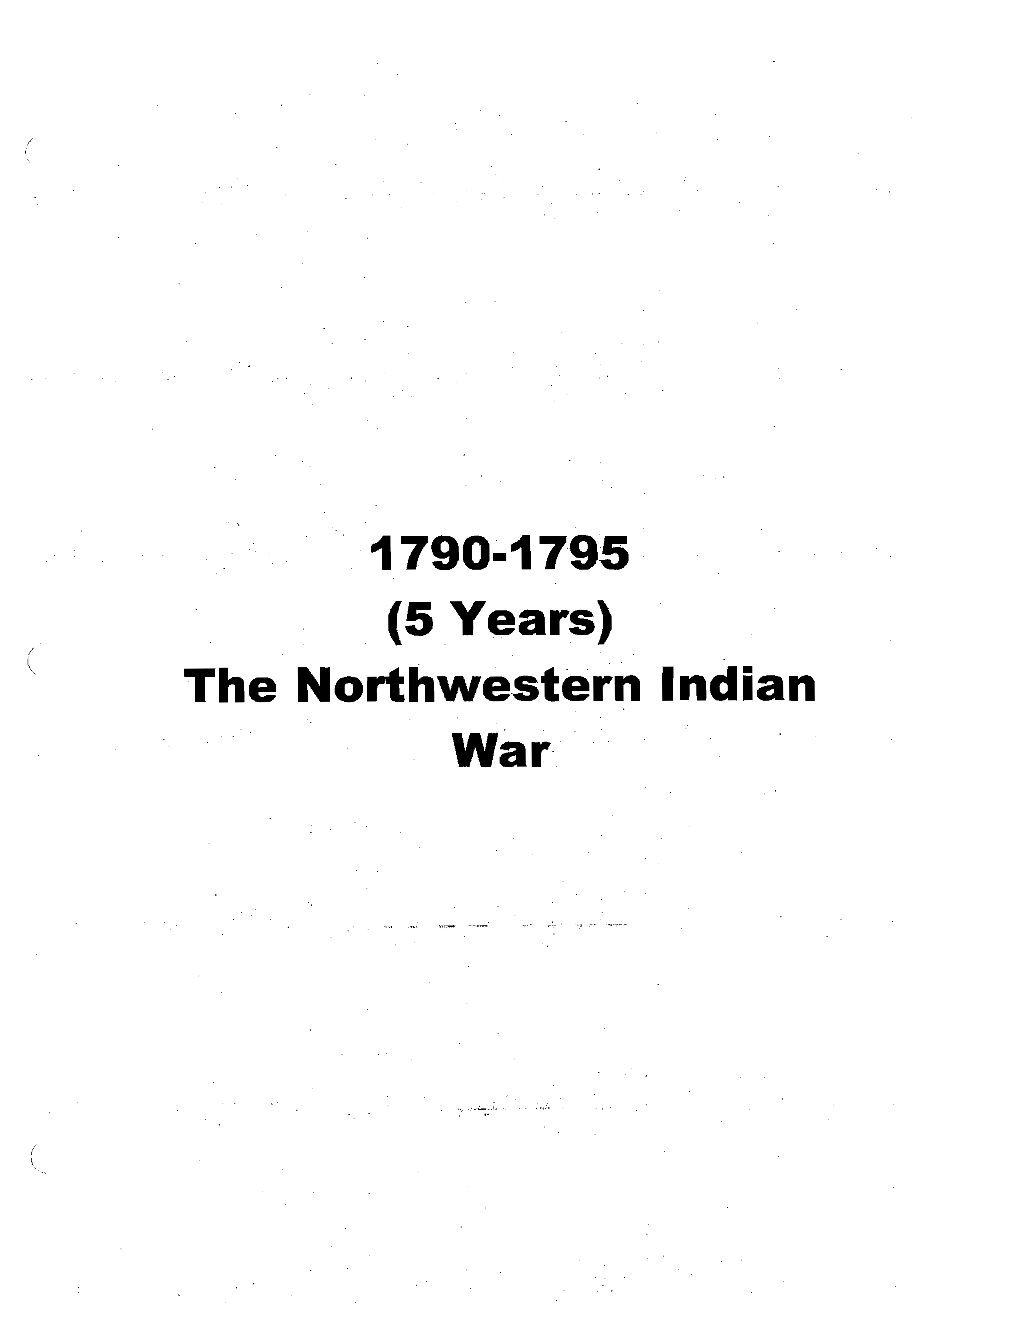 Ohio River -1783 to October 1790: A) Indians Have: I